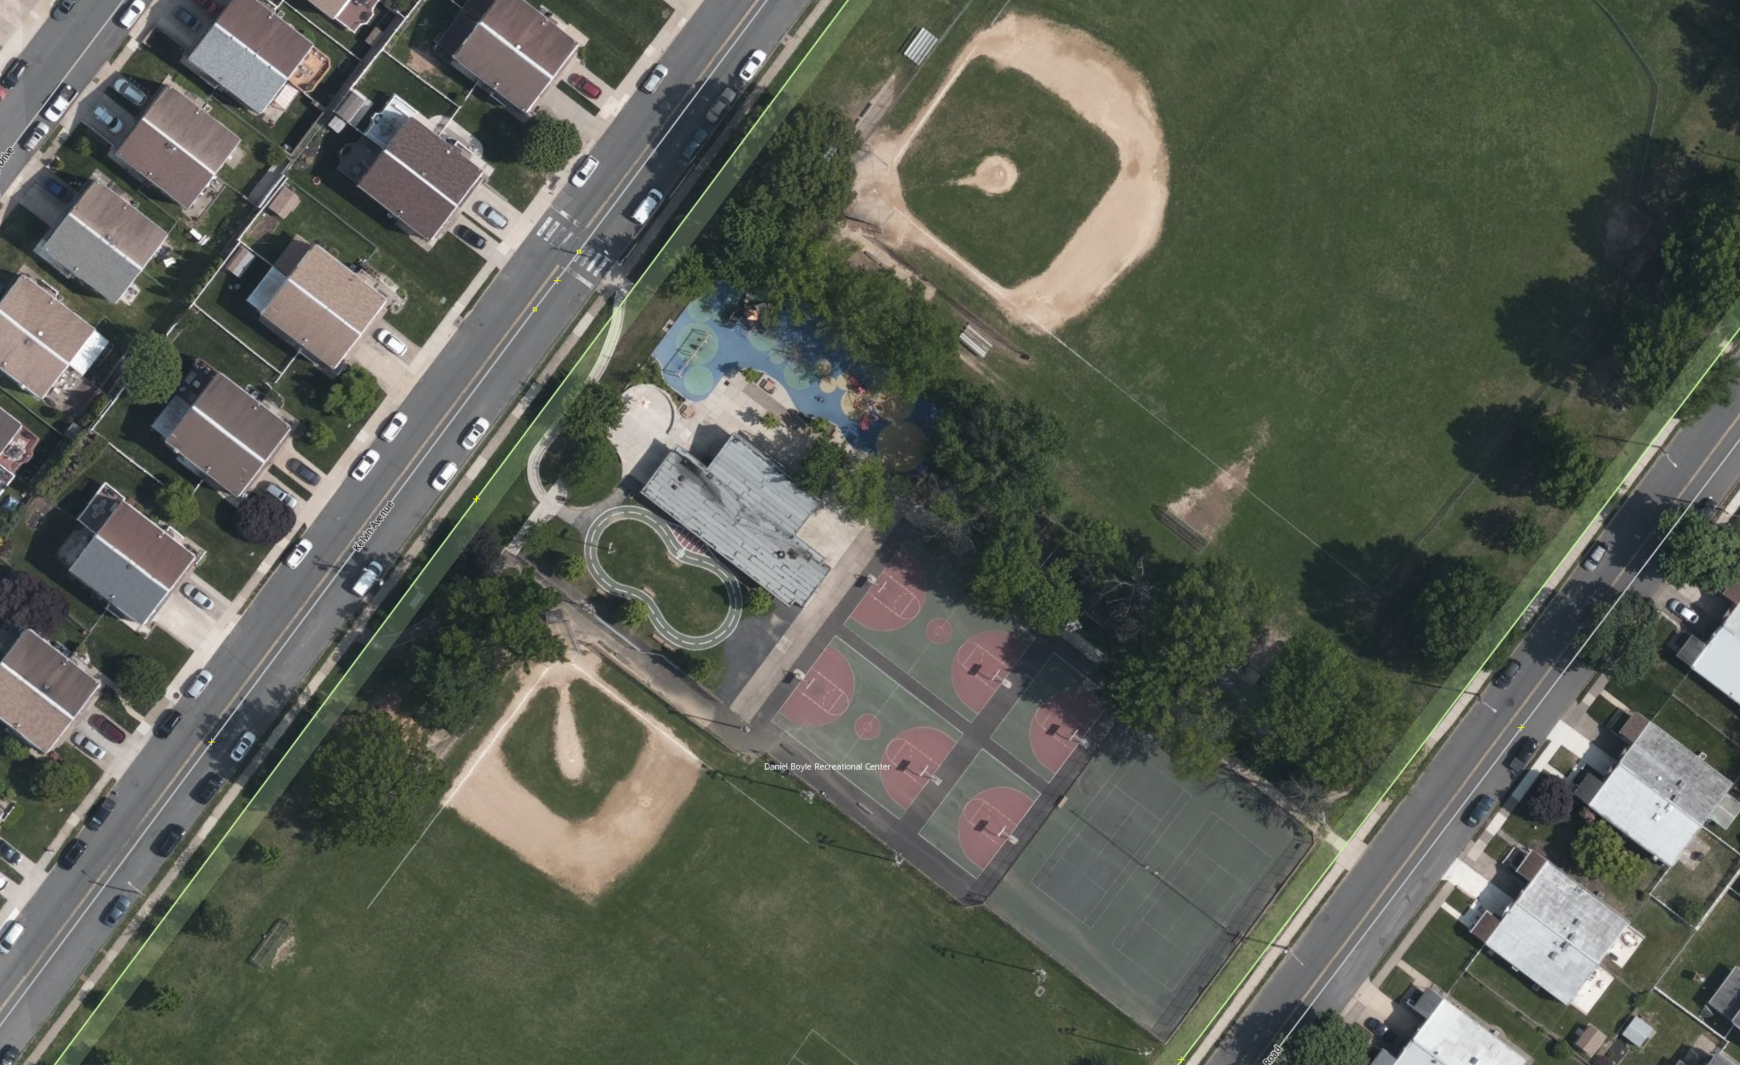 Aerial Imagery of Park with Recreation Features